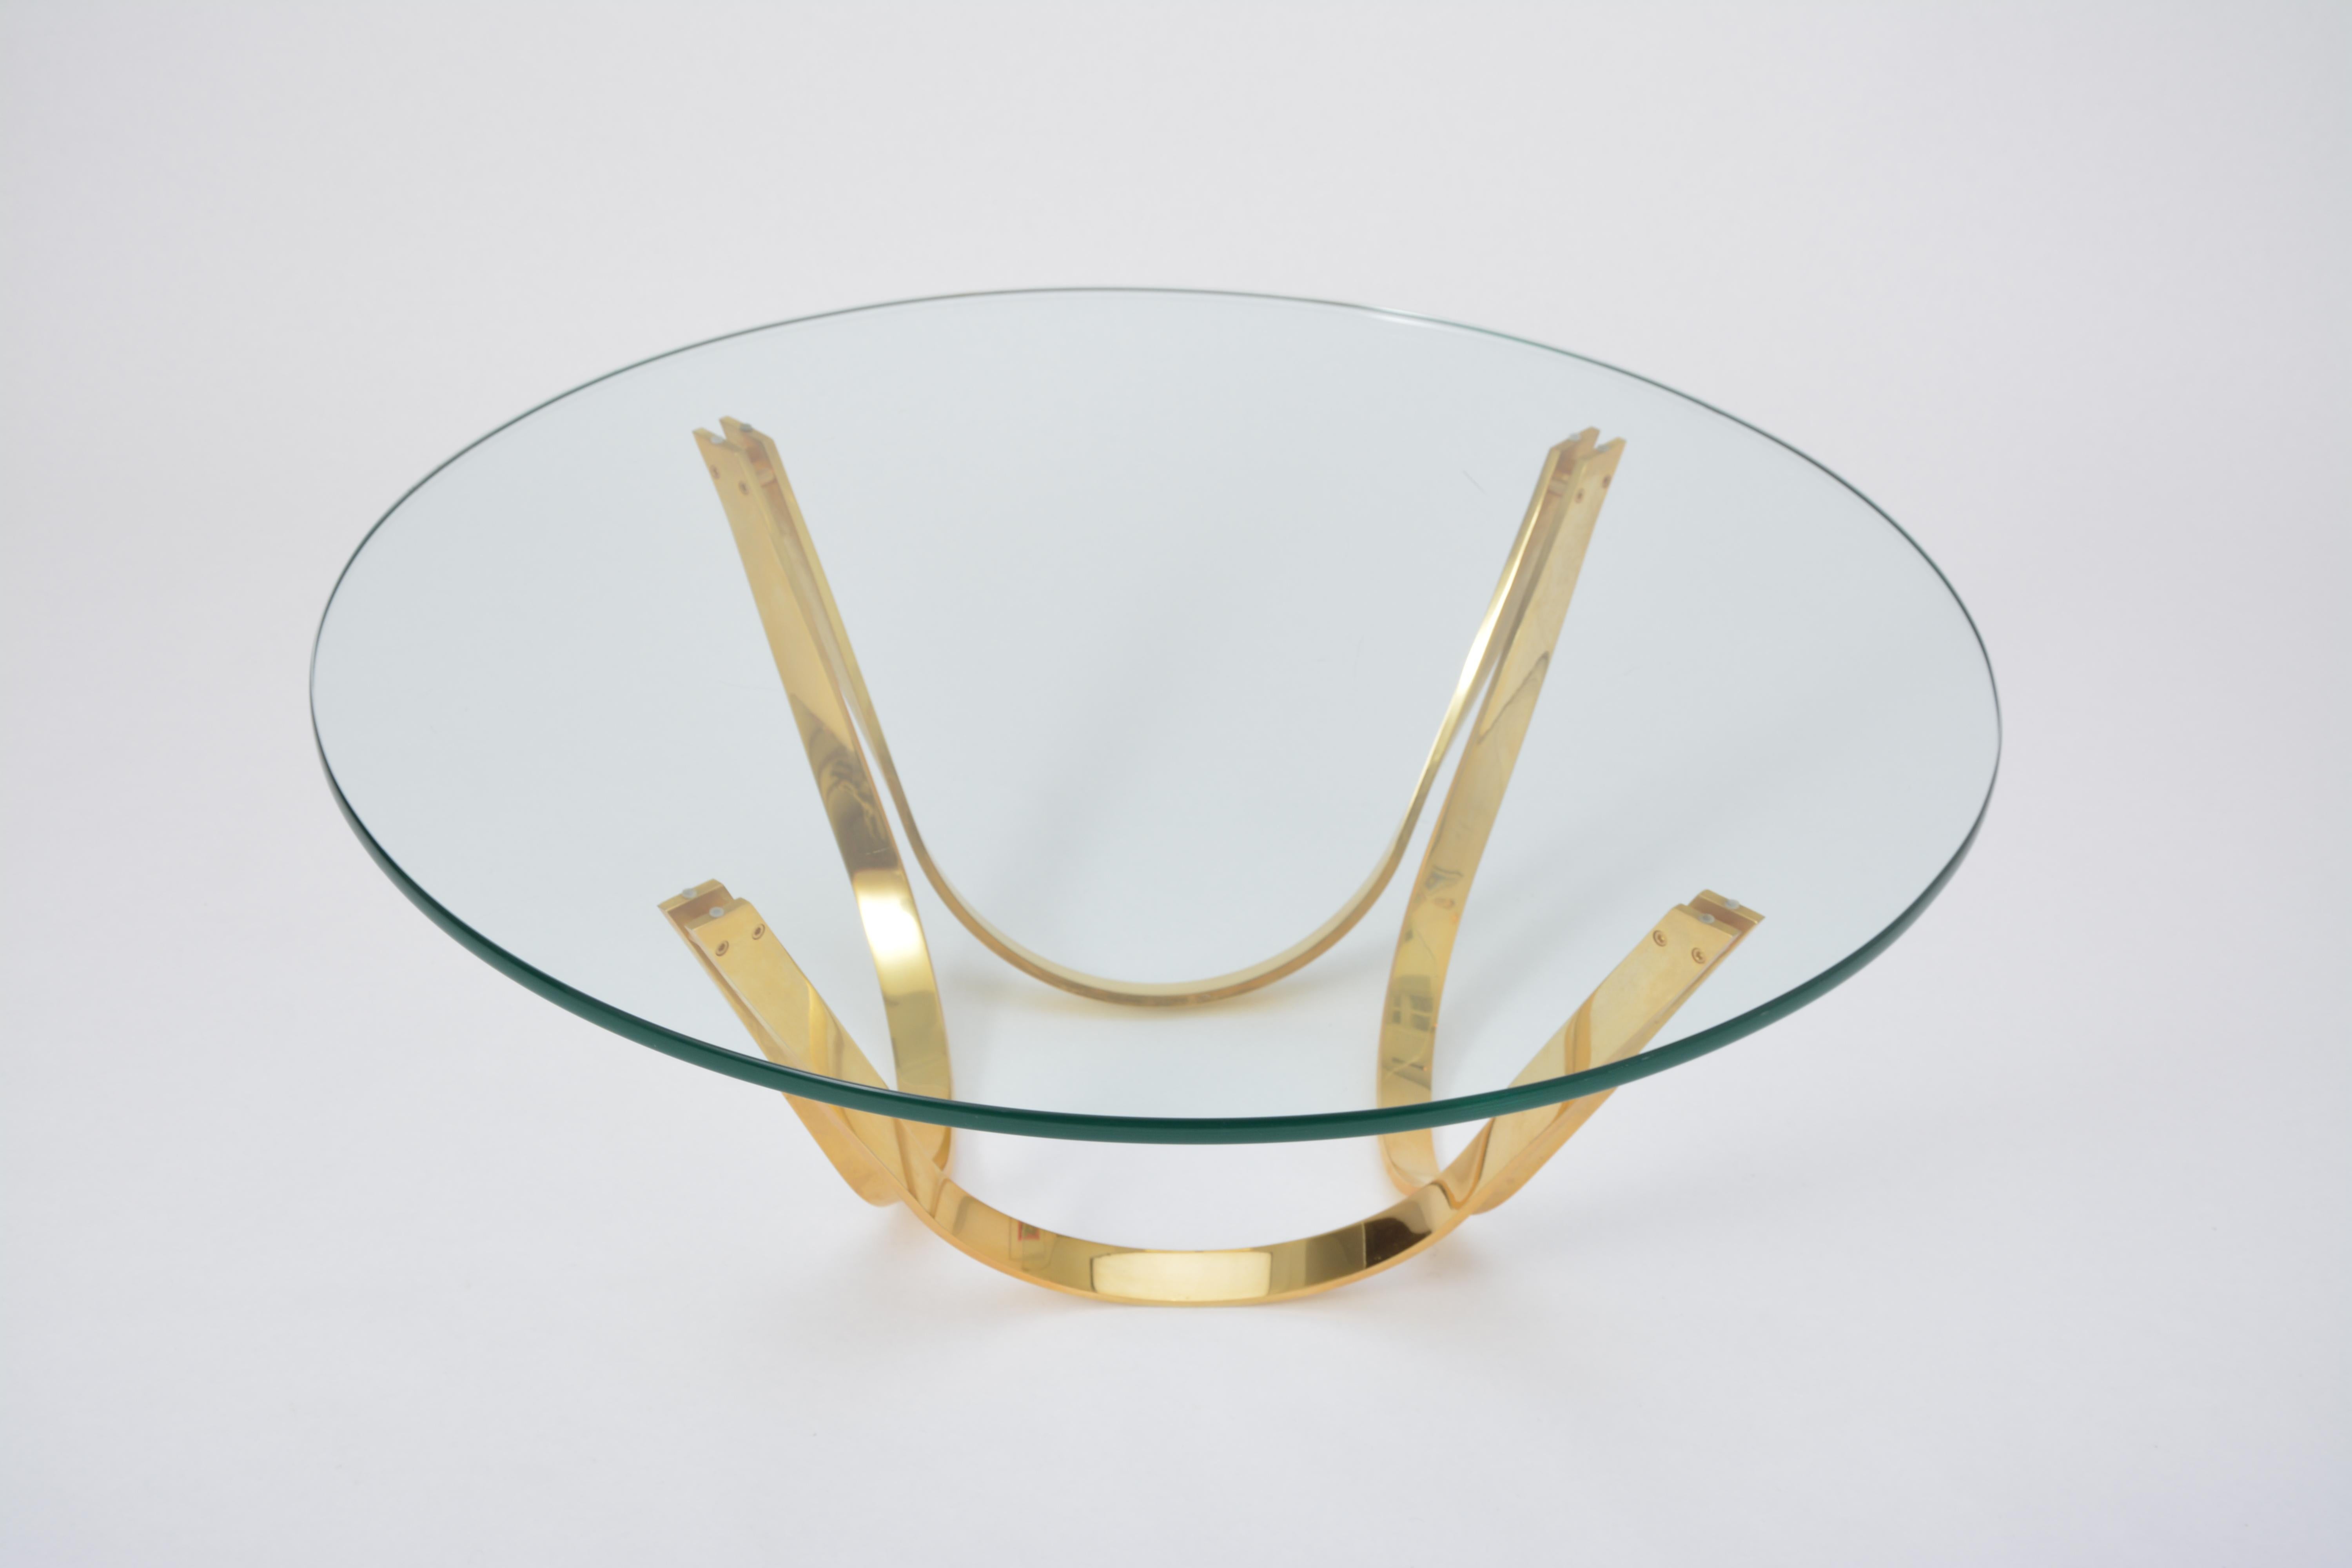 North American Golden Round Midcentury Coffee Table by Roger Sprunger for Dunbar